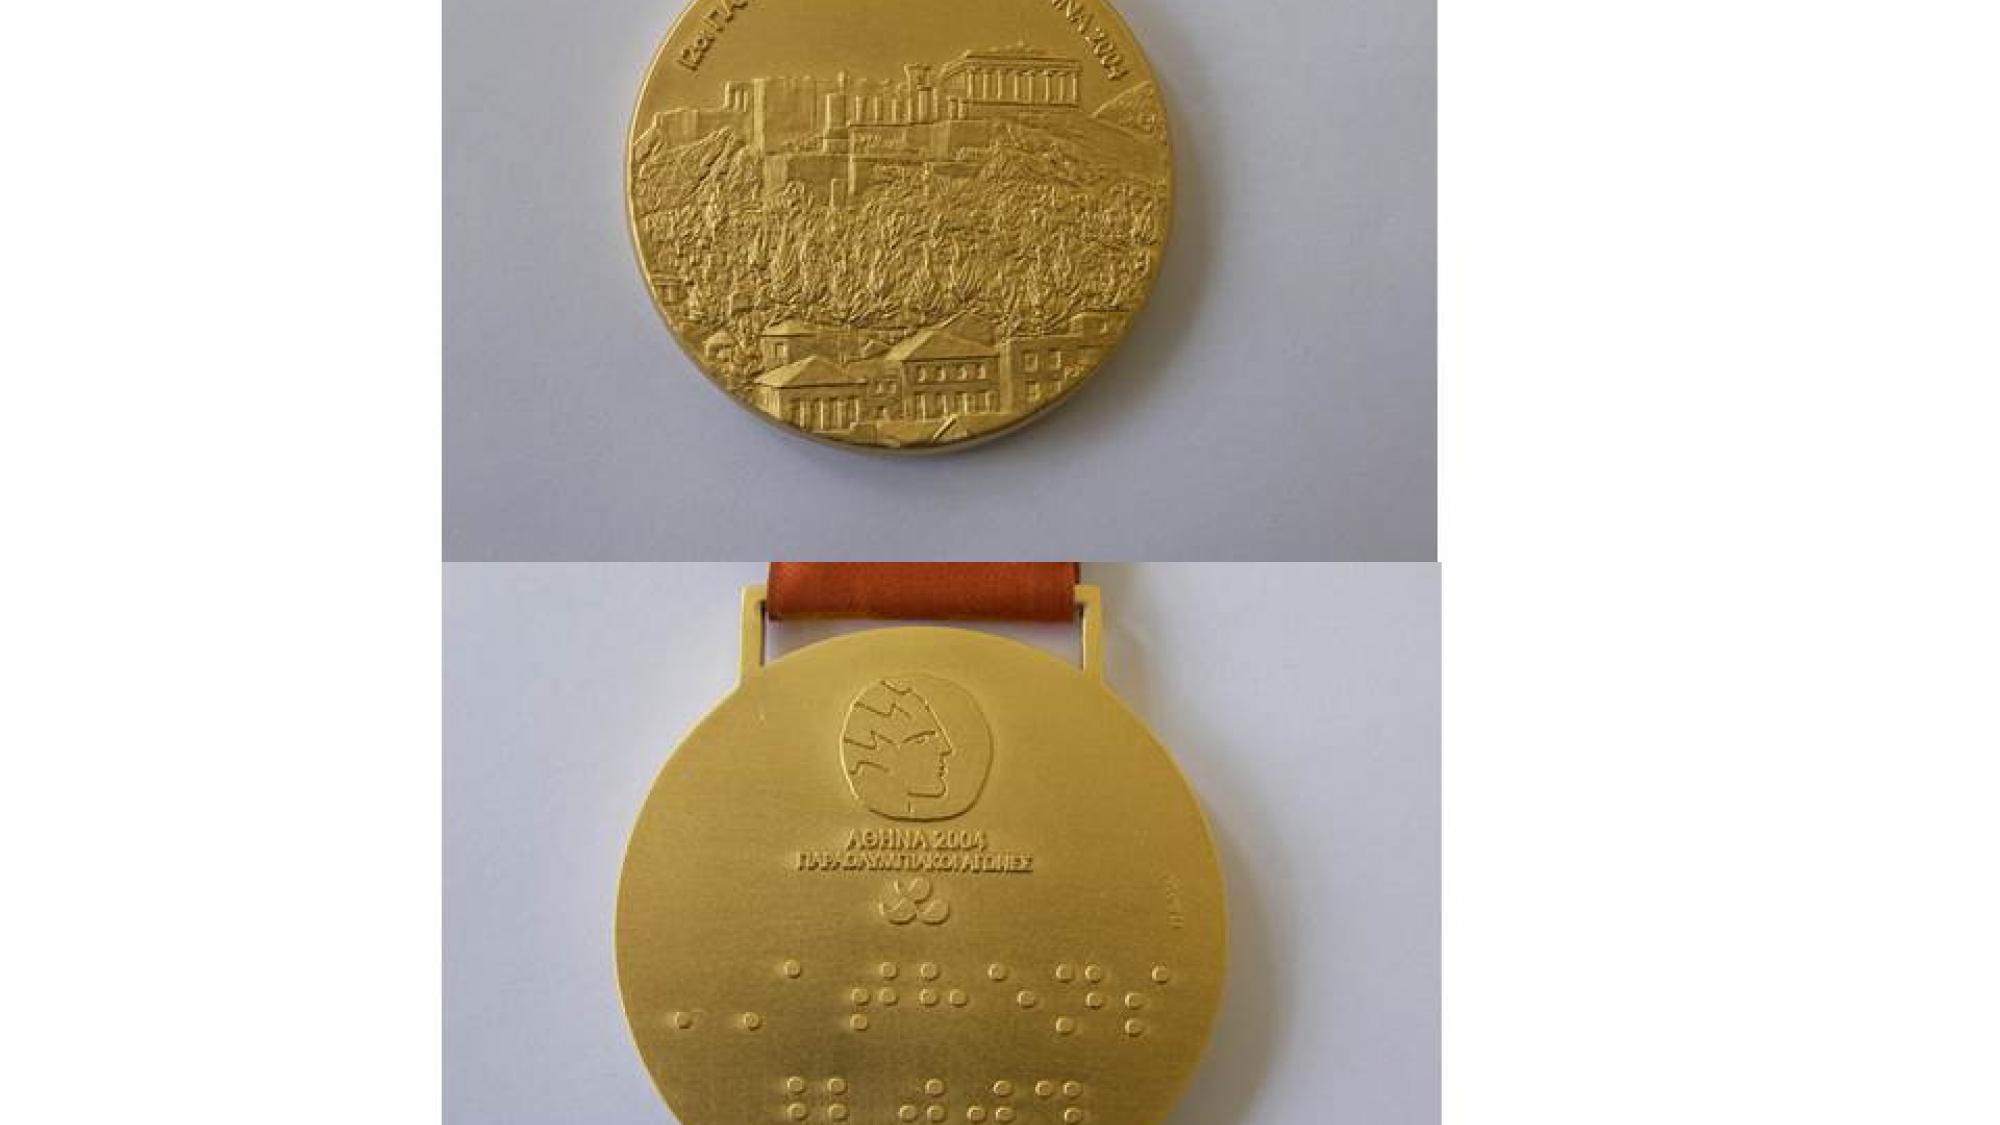 The medals of the Athens 2004 Paralympic Games